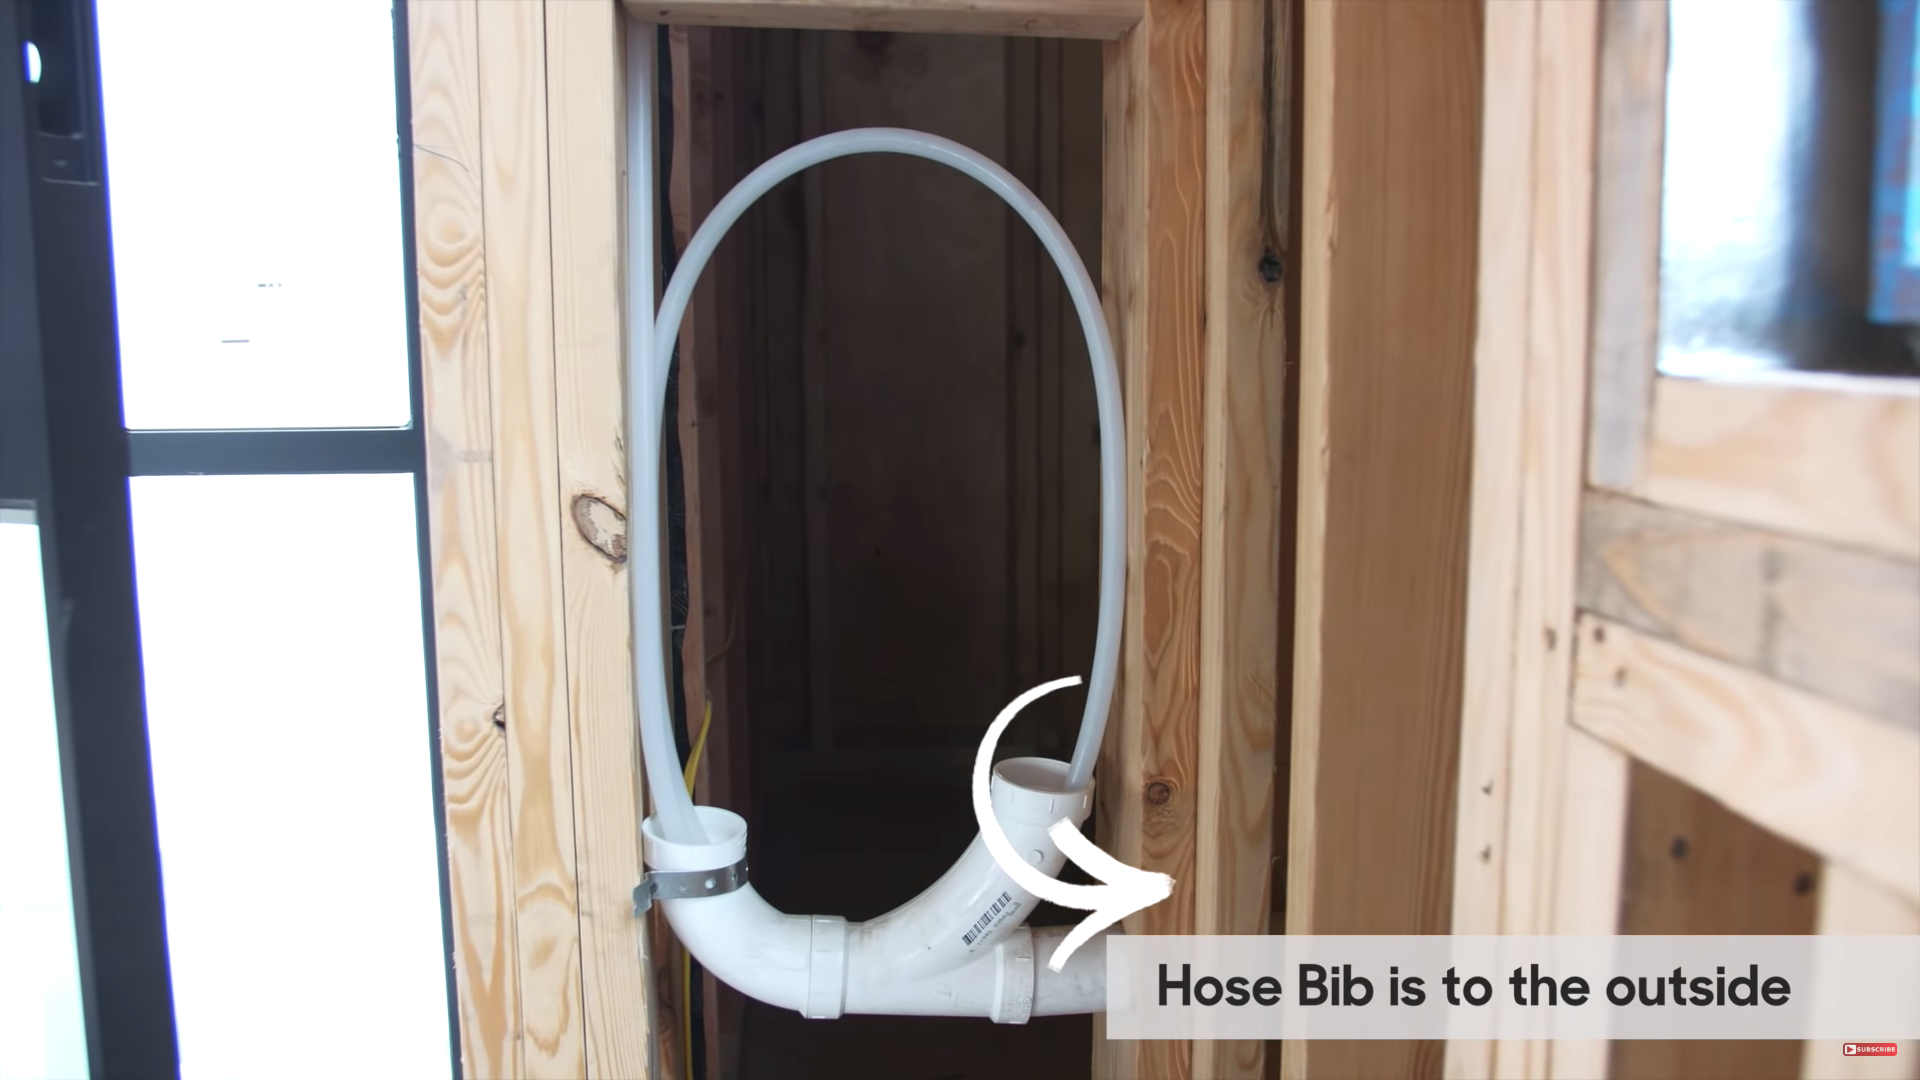 PEX requires full ball within interior wall